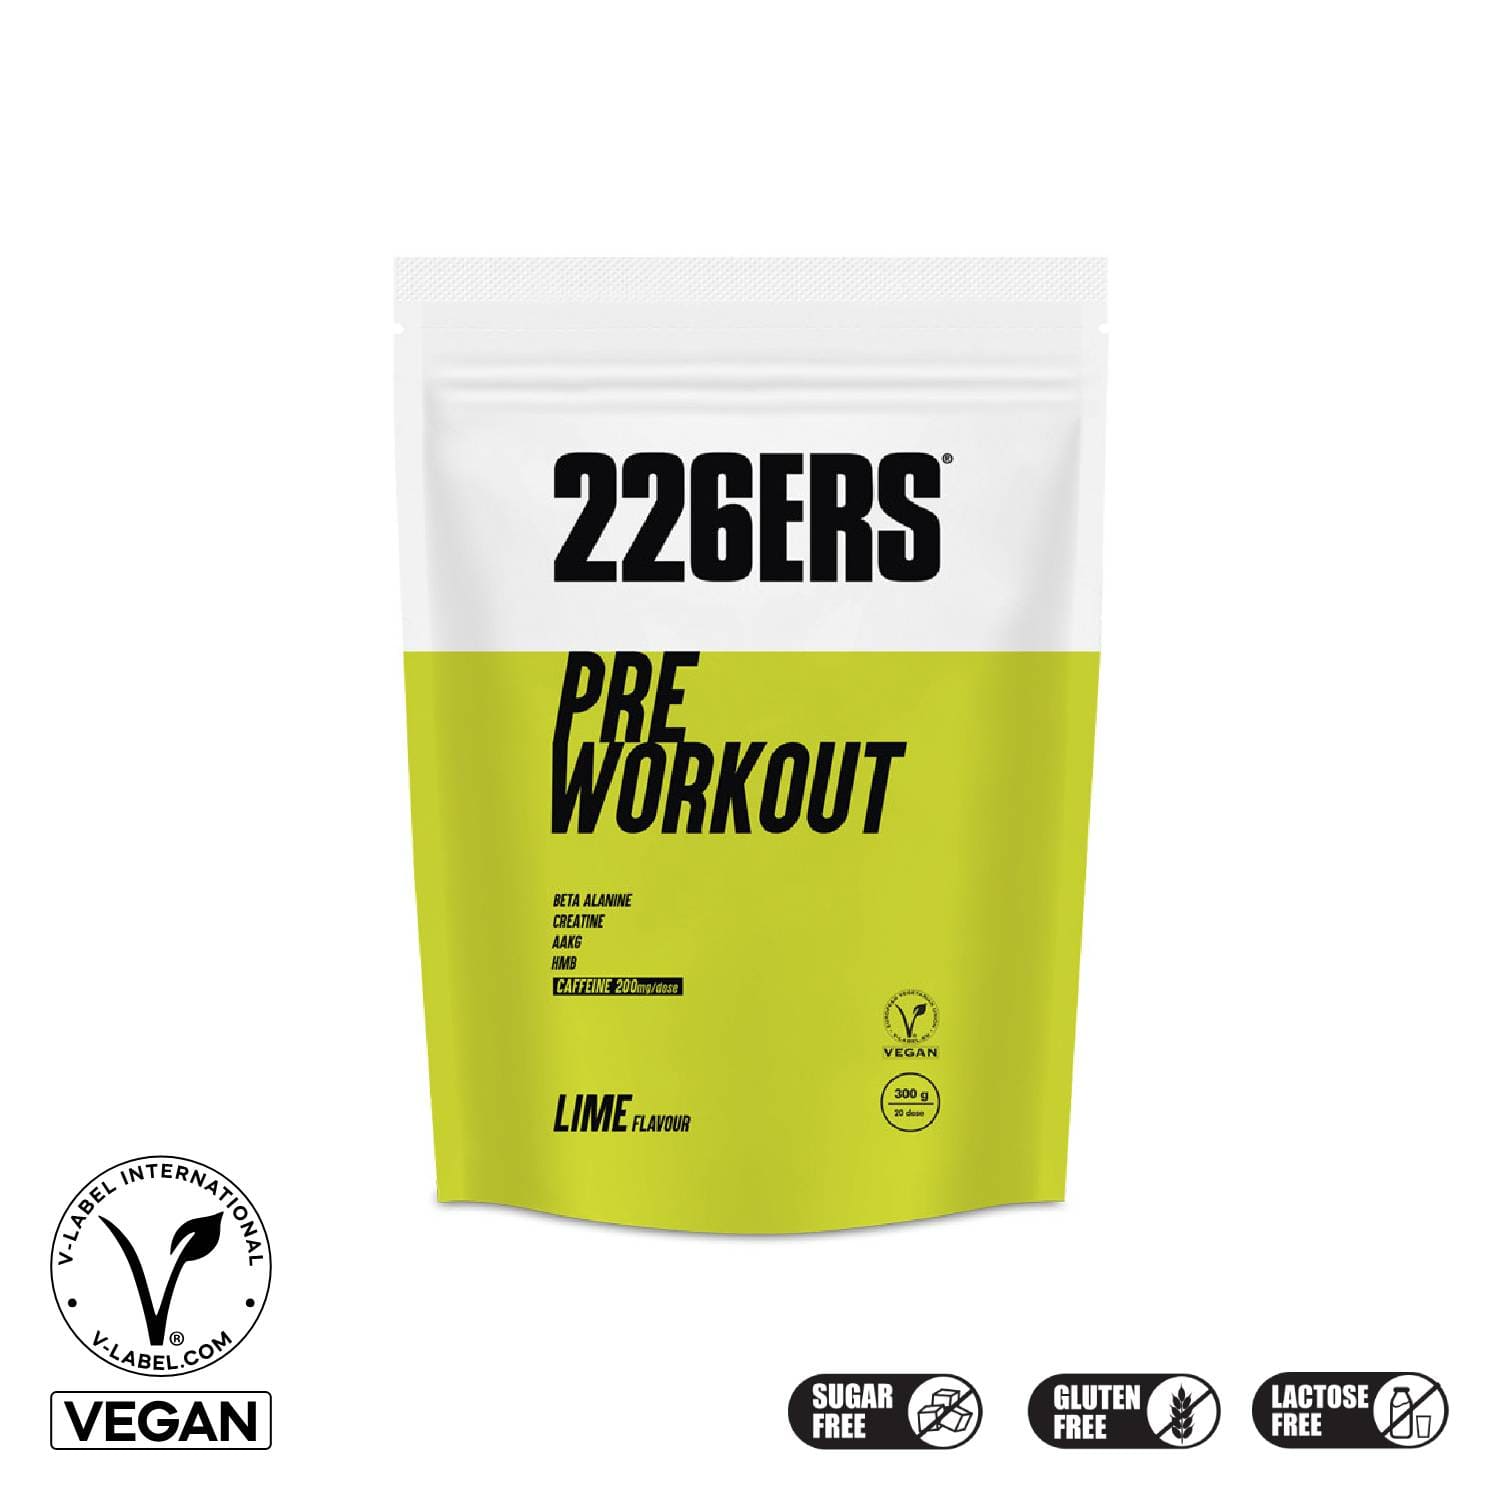 226ers Pre Workout Lime